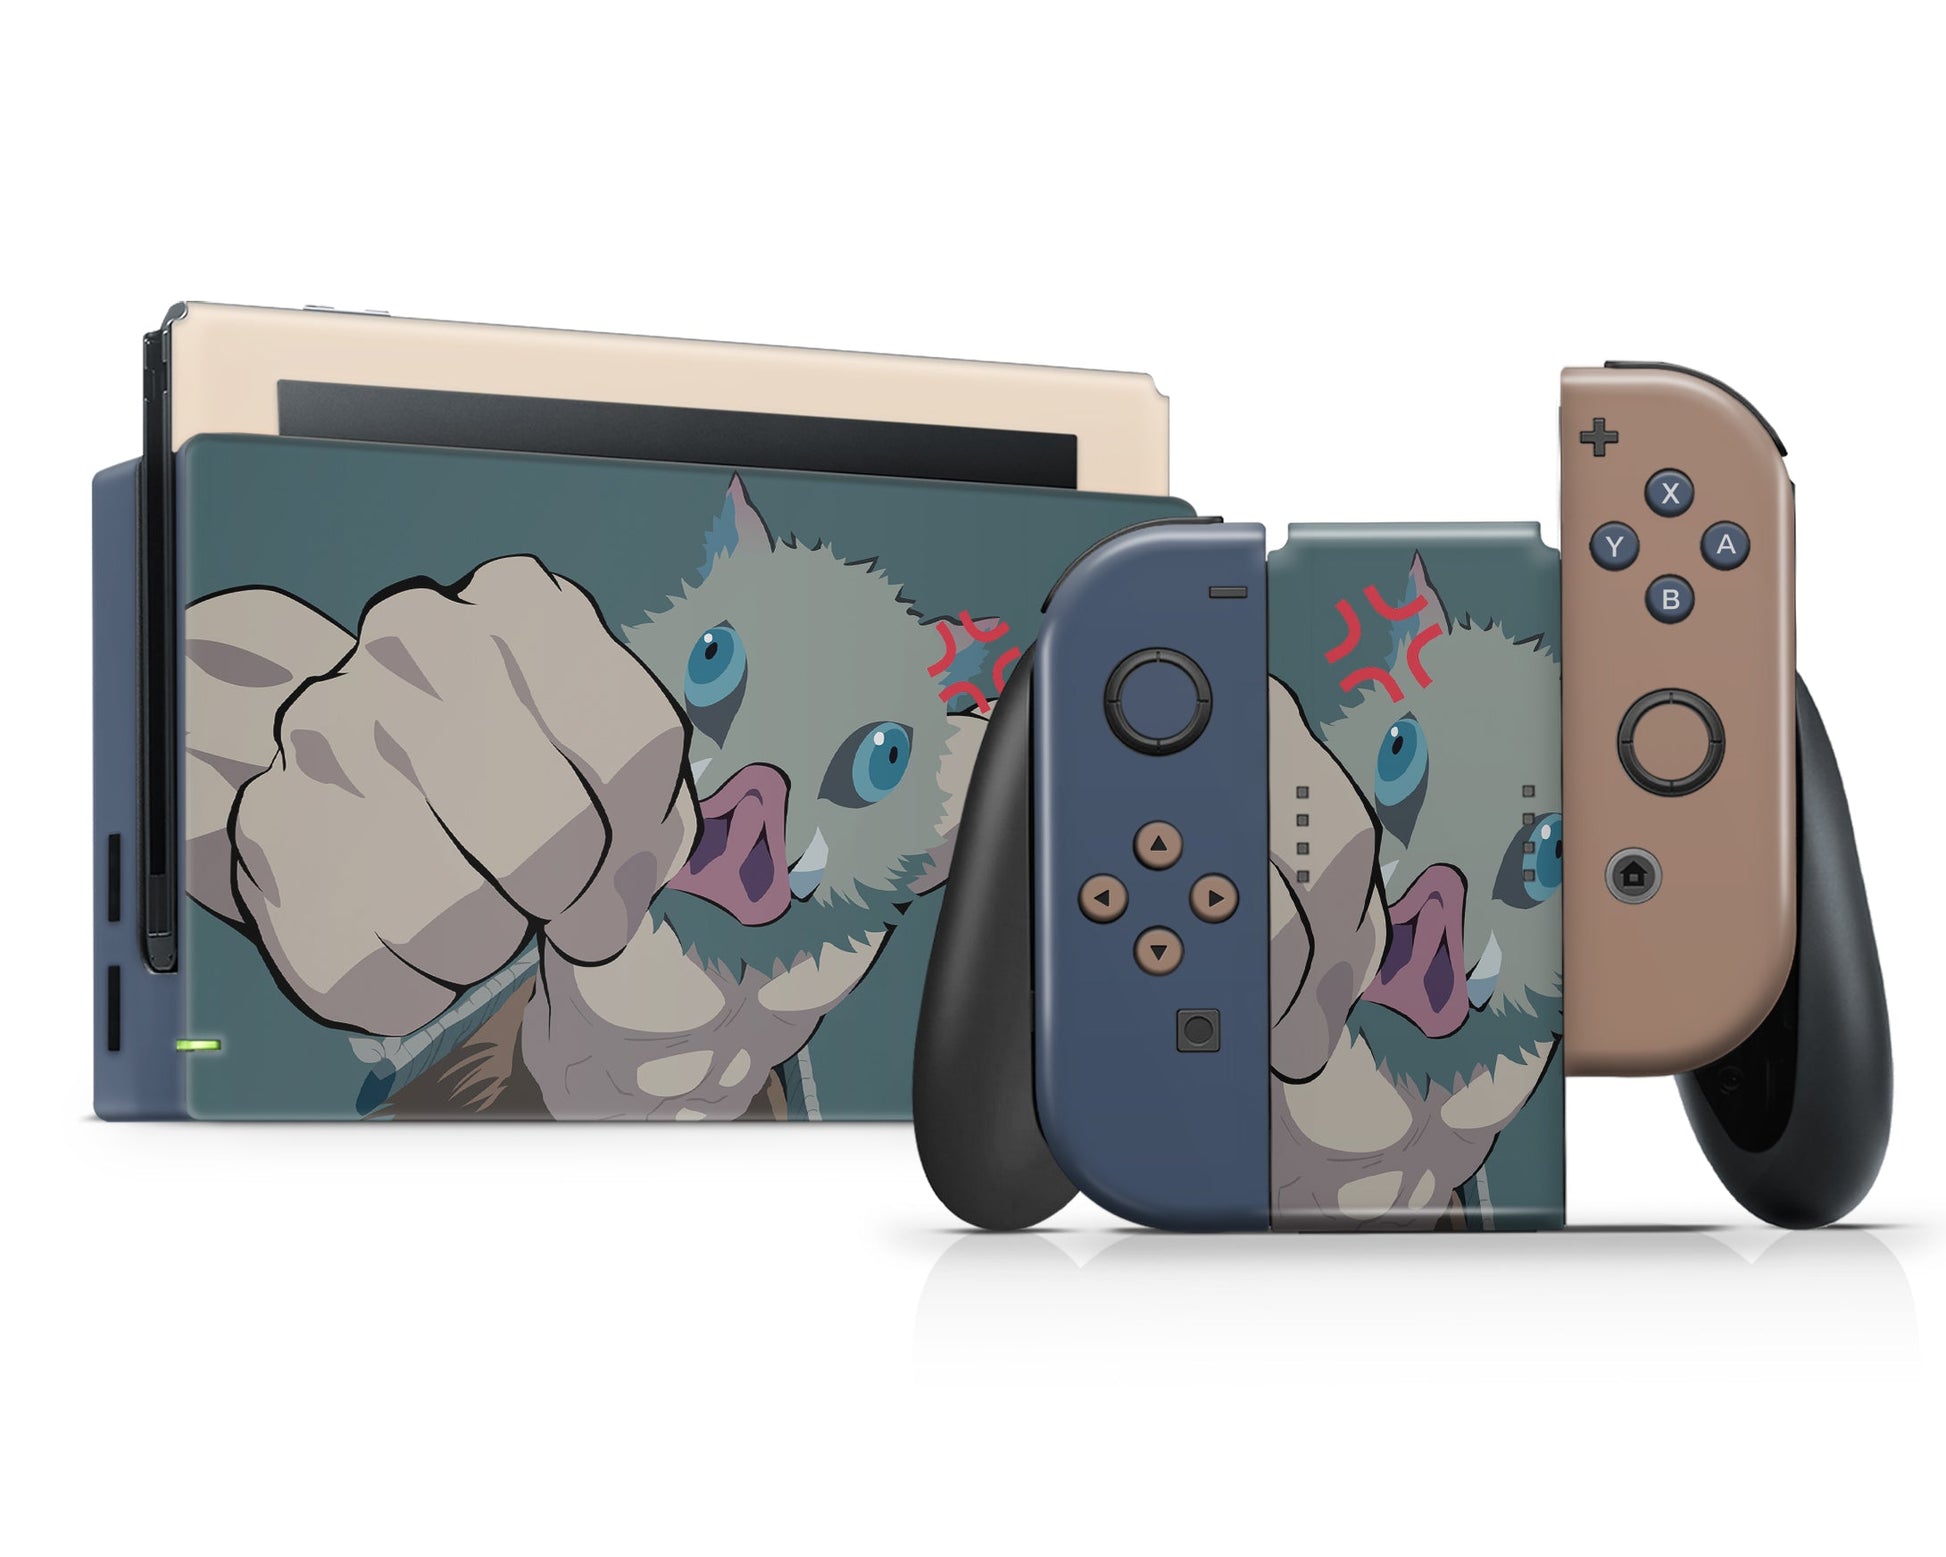 Pokemon Sword and Shield Vinyl Skin Decal Screen Protector Nintendo Switch  OLED